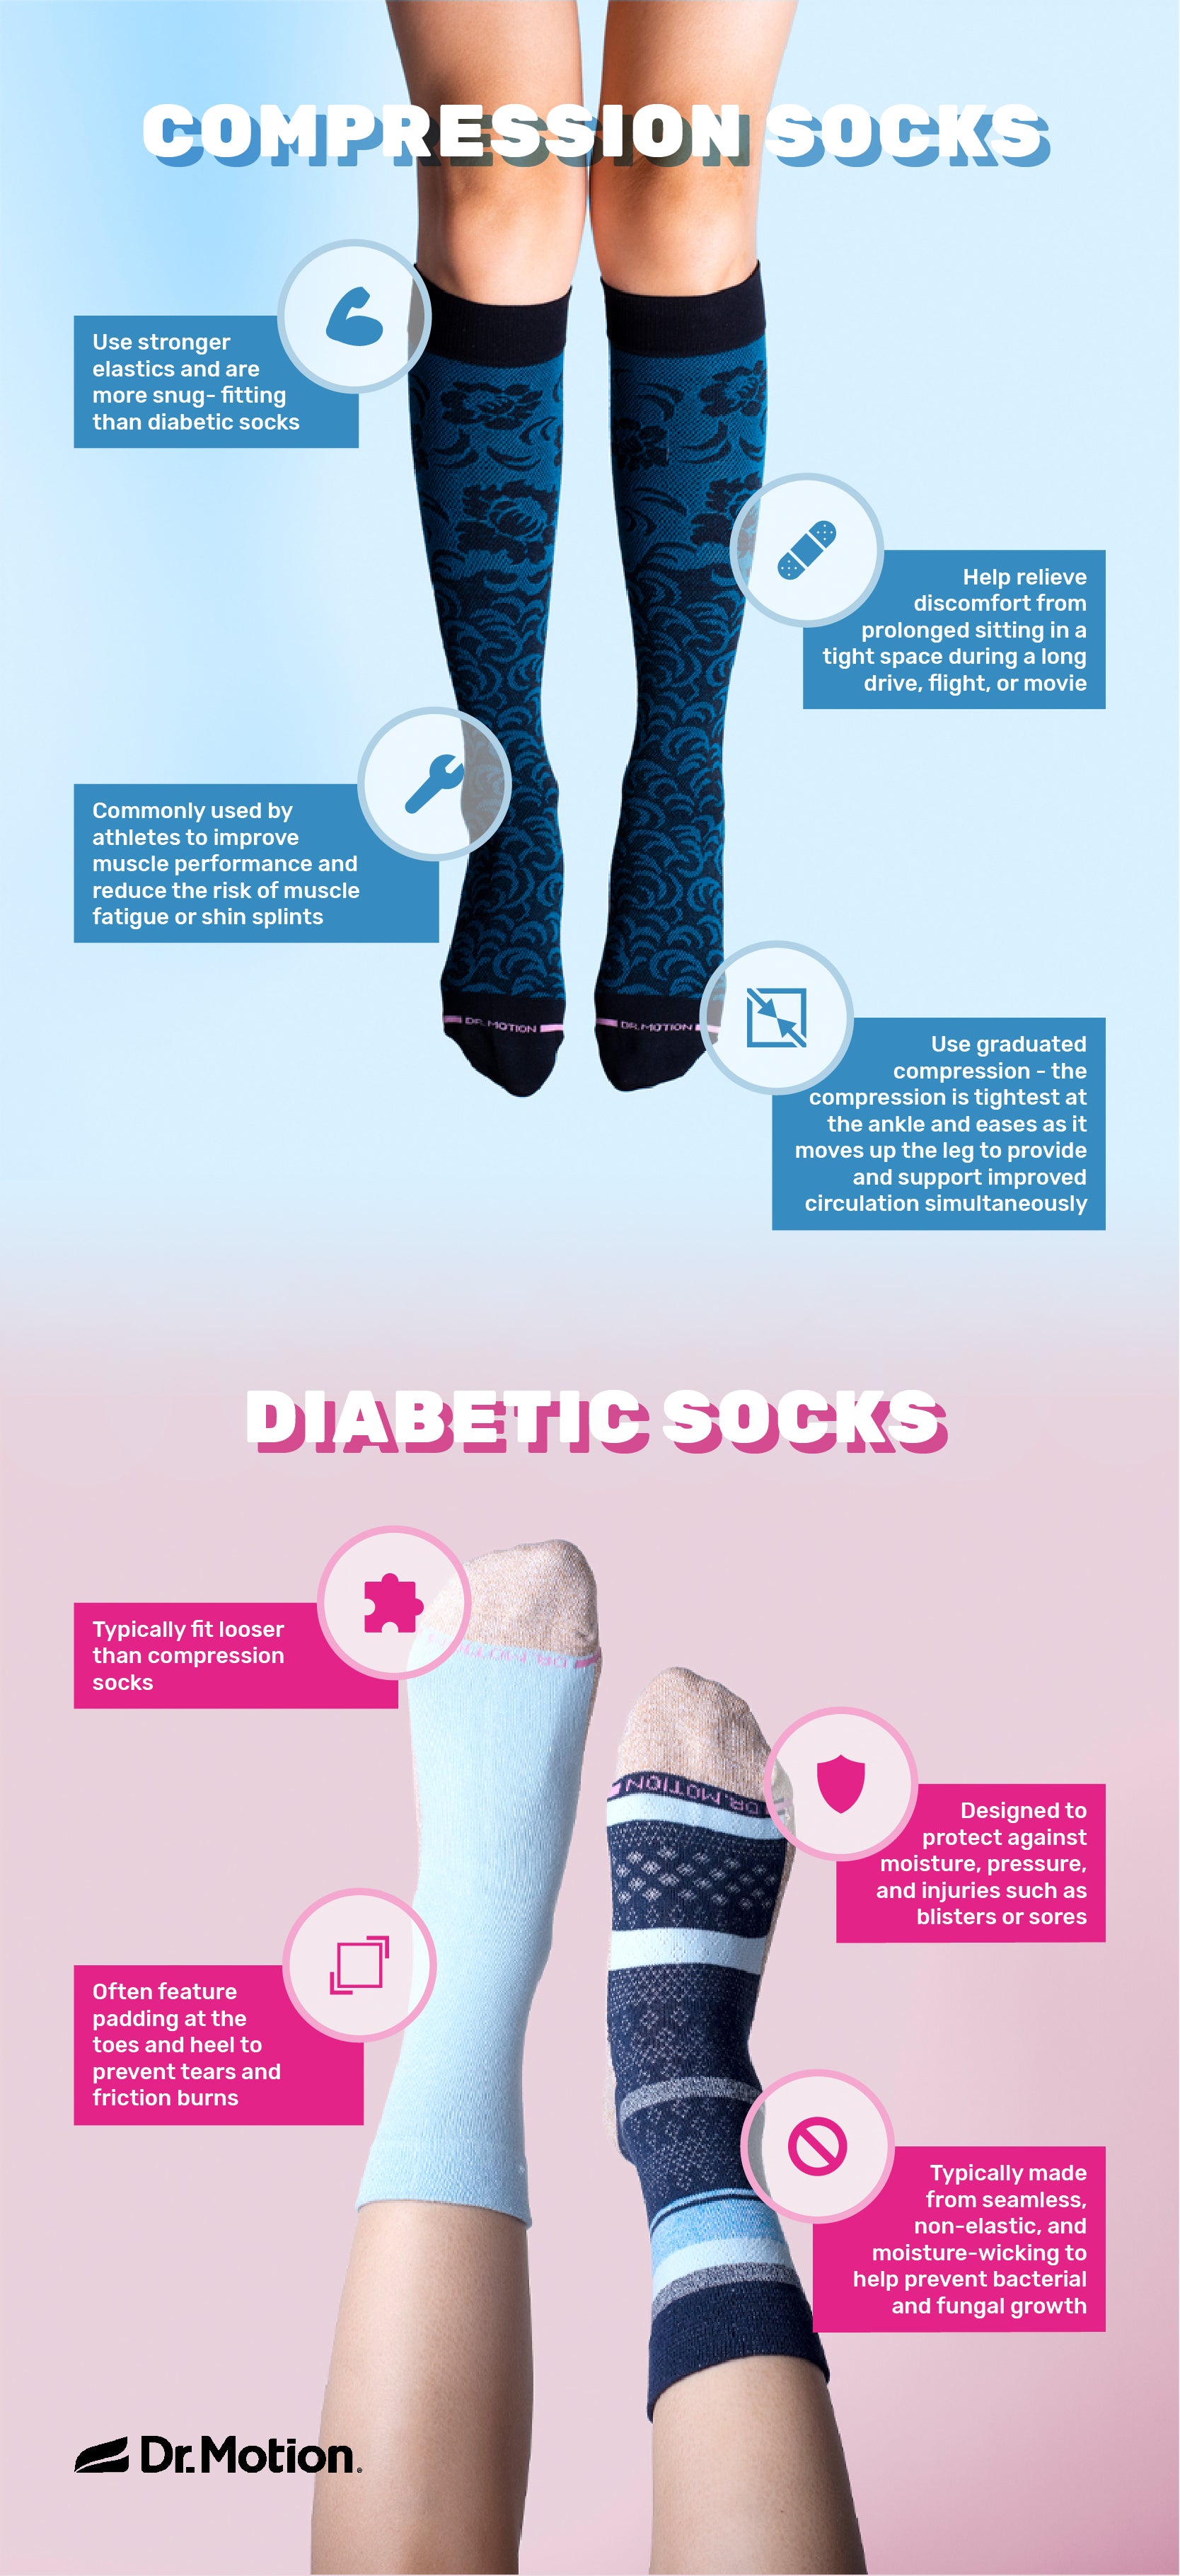 What Makes the Best Diabetic Socks? [Infographic]